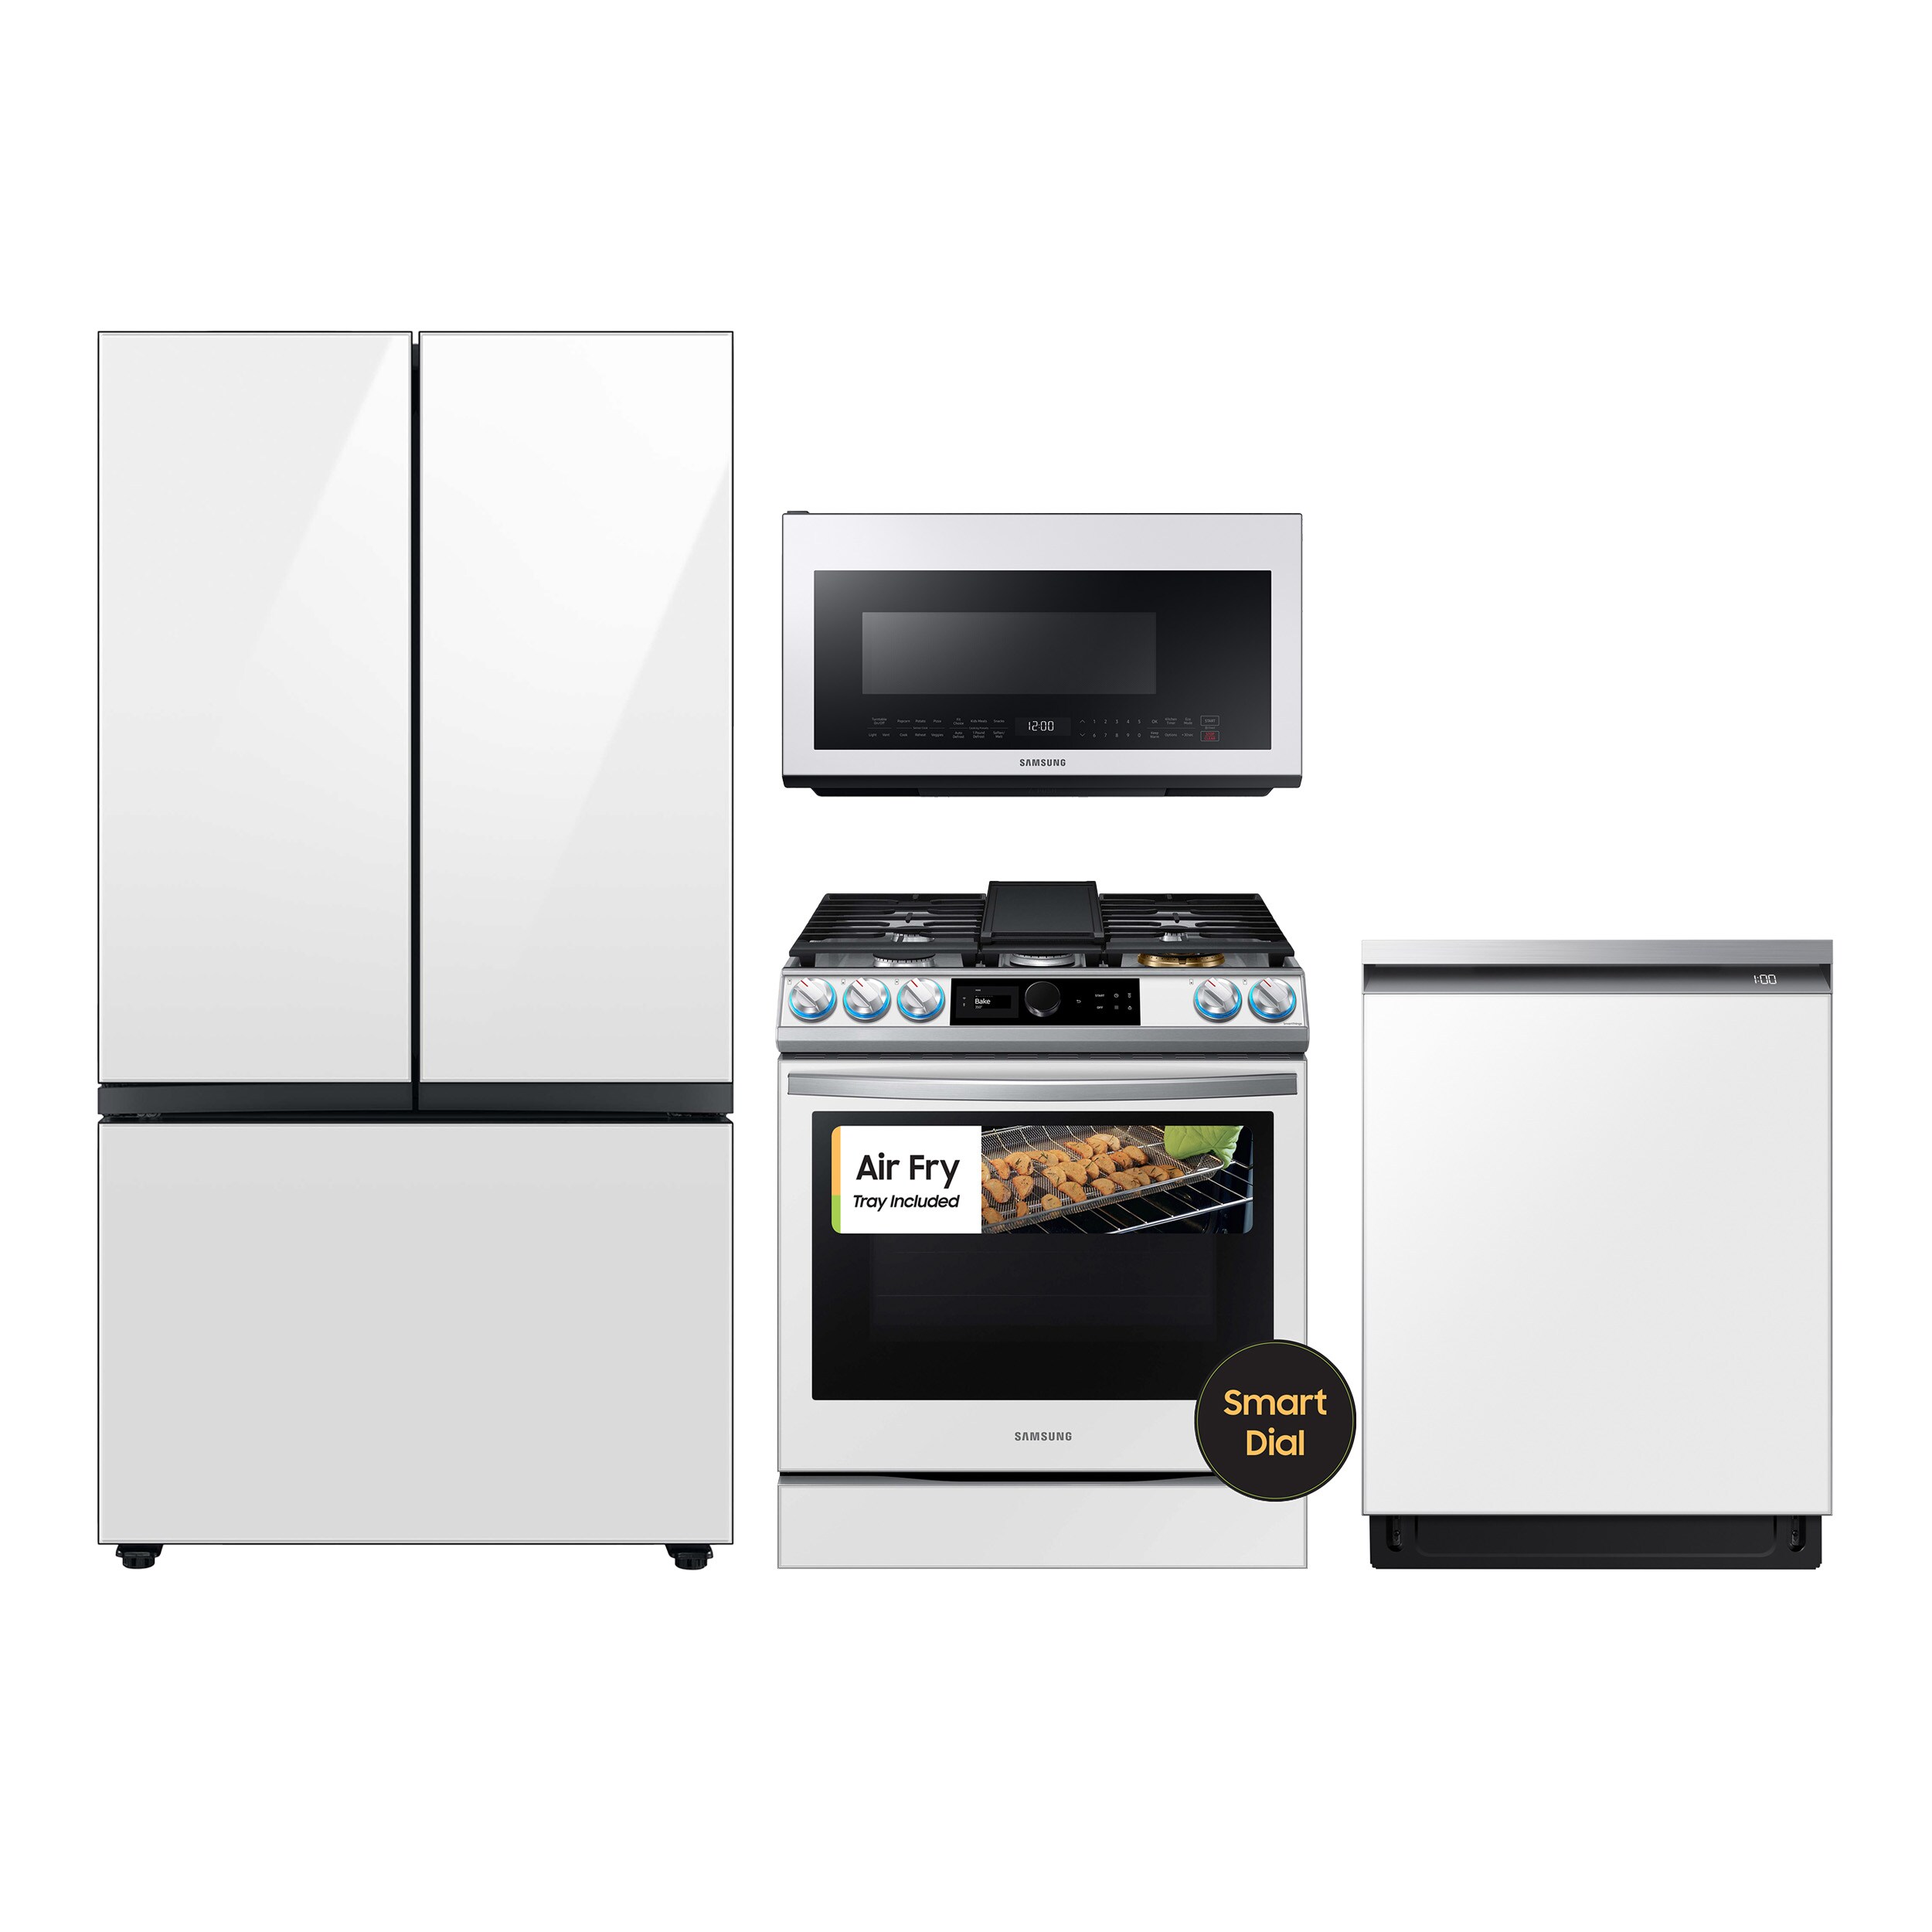 Bespoke Smart Slide-In GAS Range 6.0 Cu. ft. with Smart Dial, Air Fry & Wi-Fi in White Glass